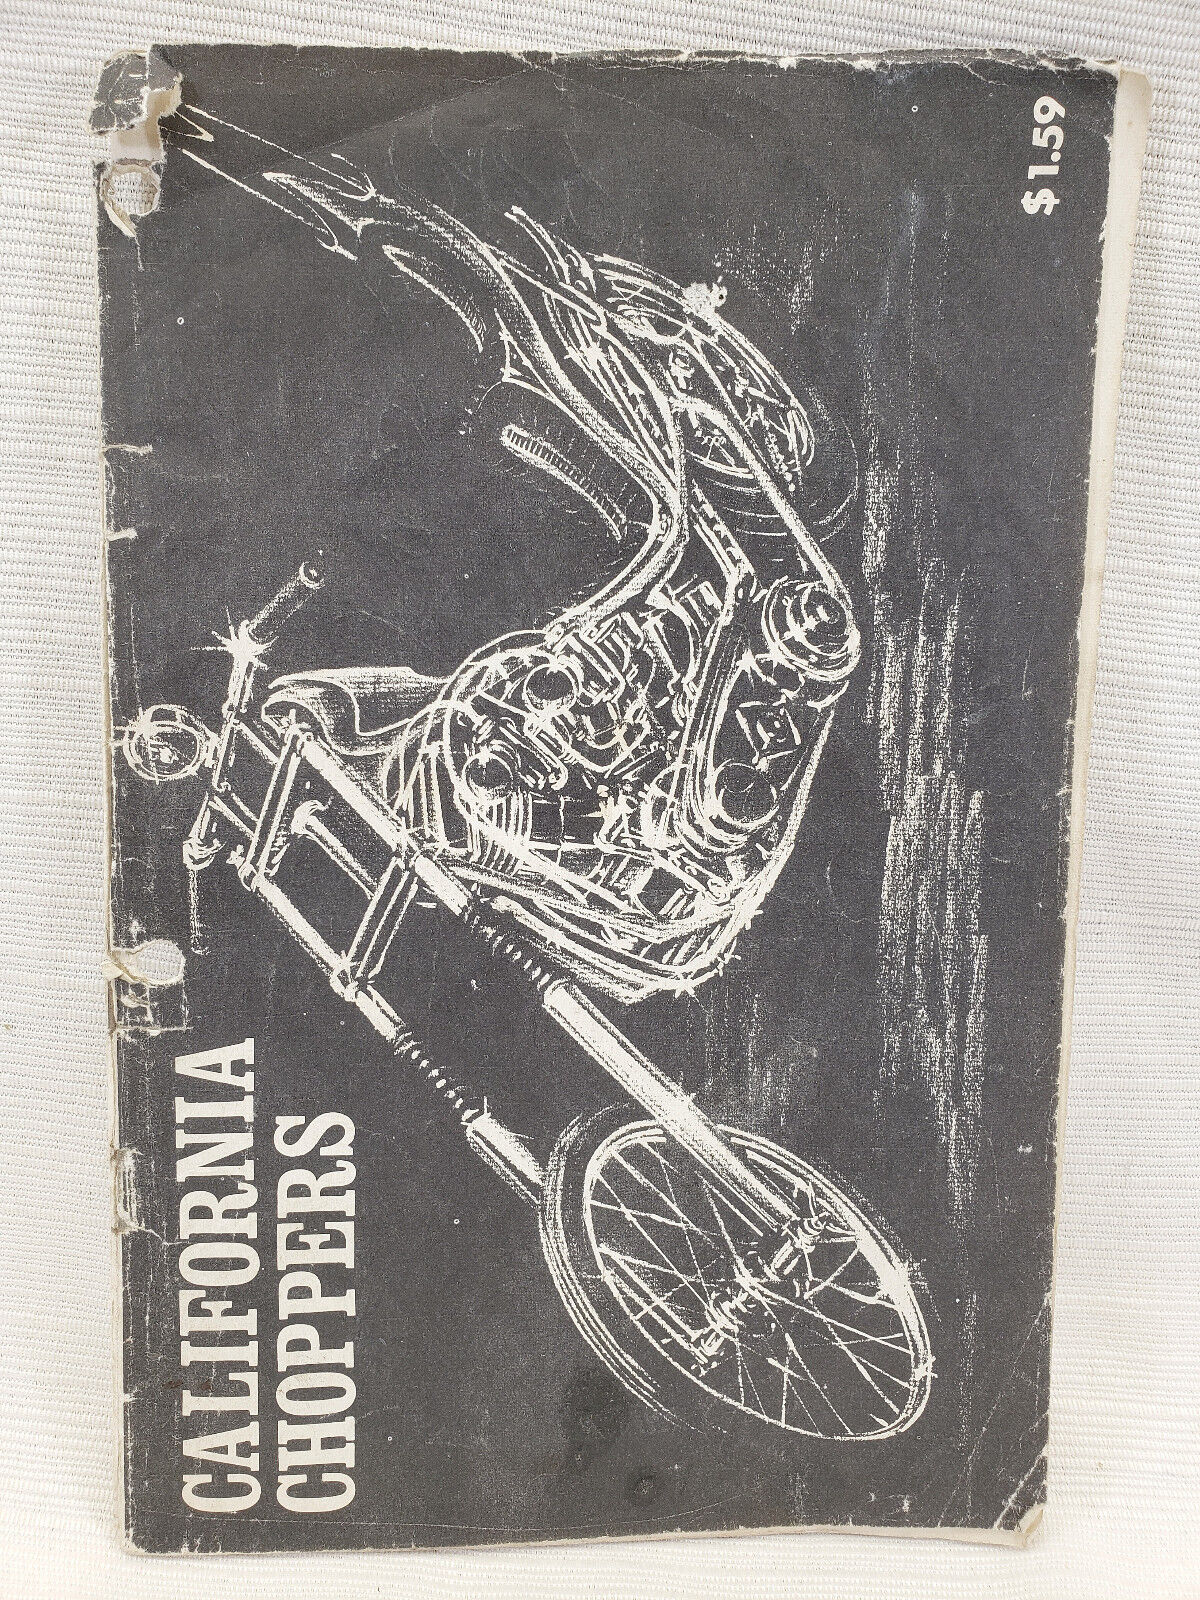 c.1966 CALIFORNIA CHOPPERS Vintage Magazine Custom Motorcycle Book ~by ED ROTH~